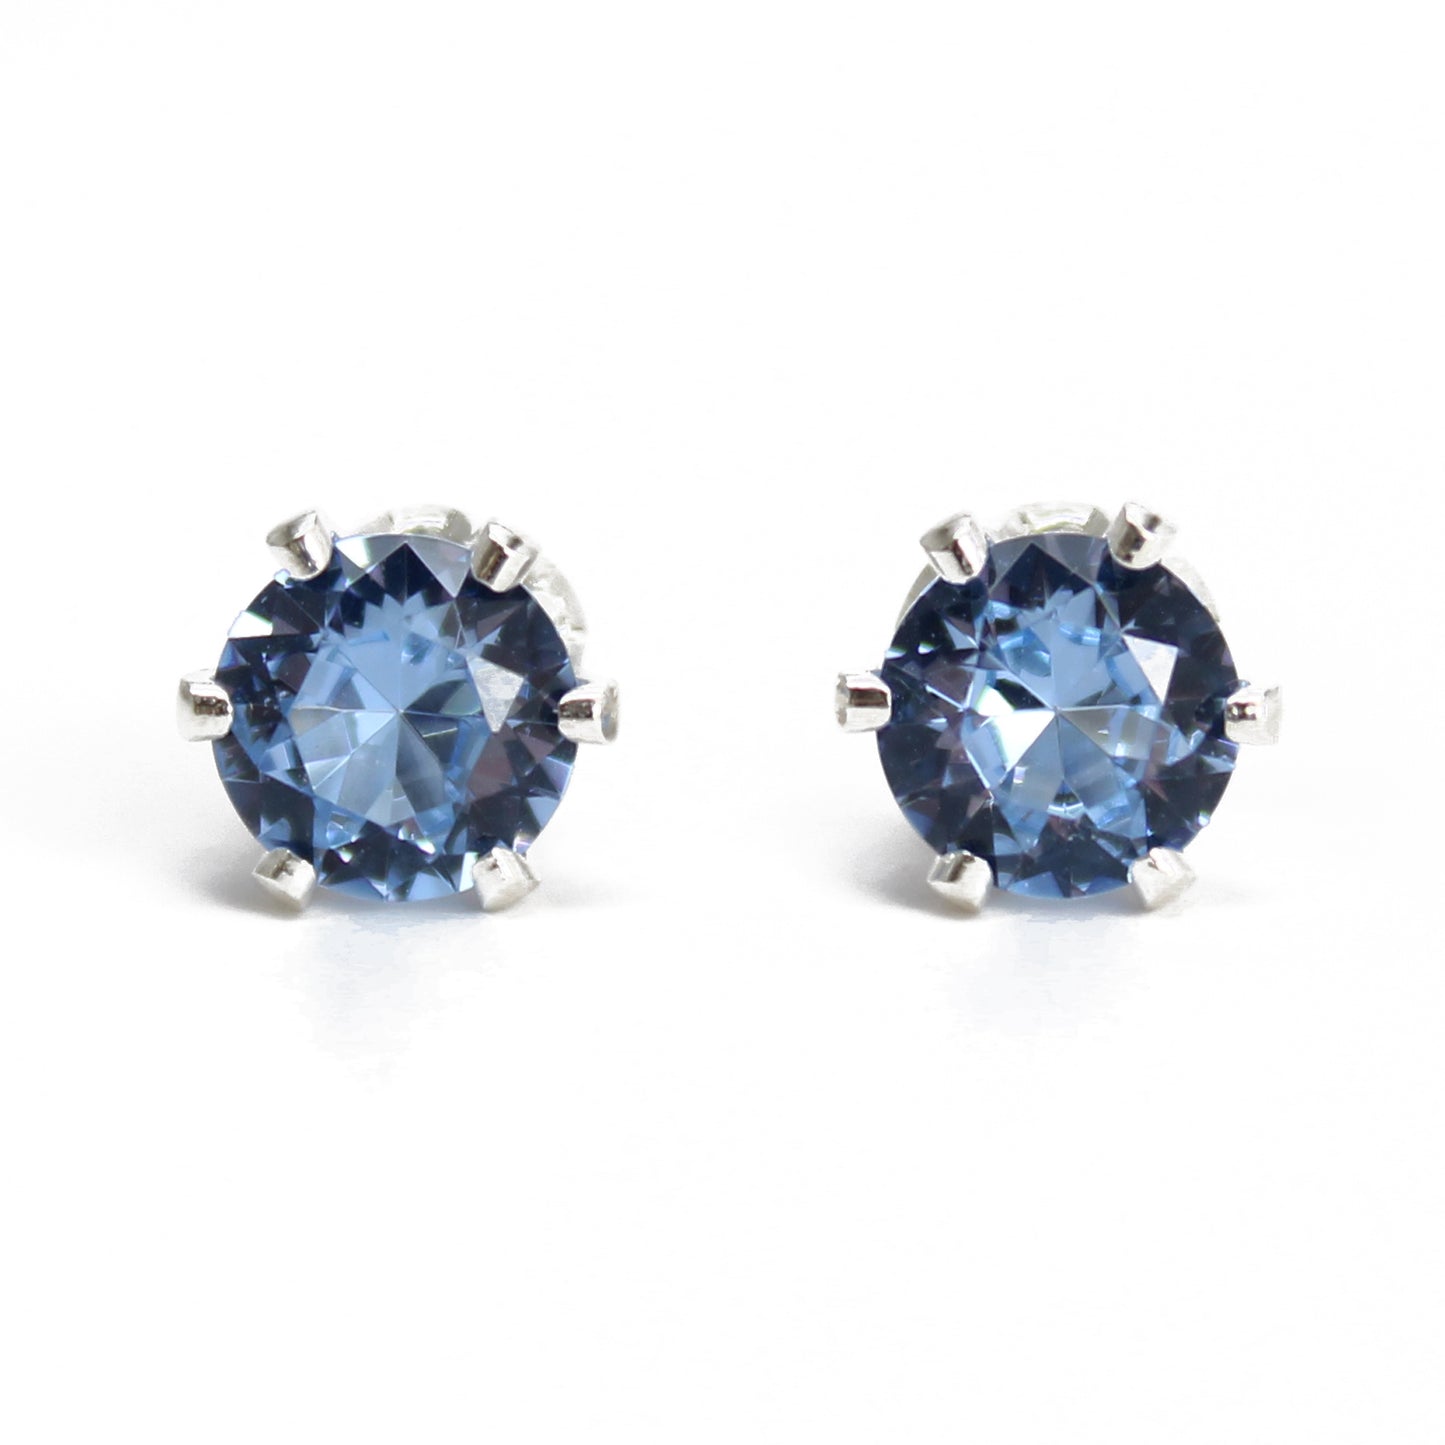 Aquamarine Stud Earrings, 6mm Round Prong Set 925 Sterling Silver